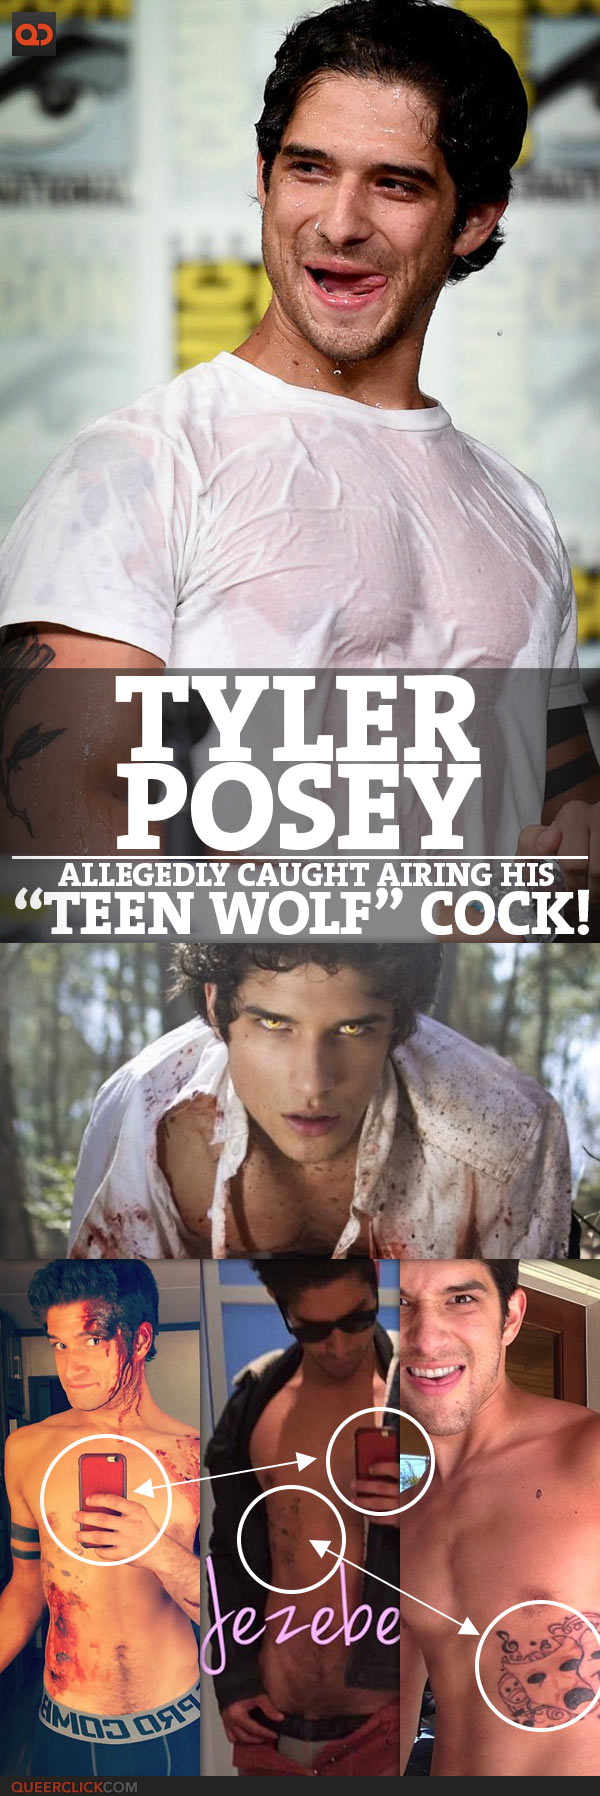 Tyler Posey Allegedly Caught Airing His “Teen Wolf” Cock!